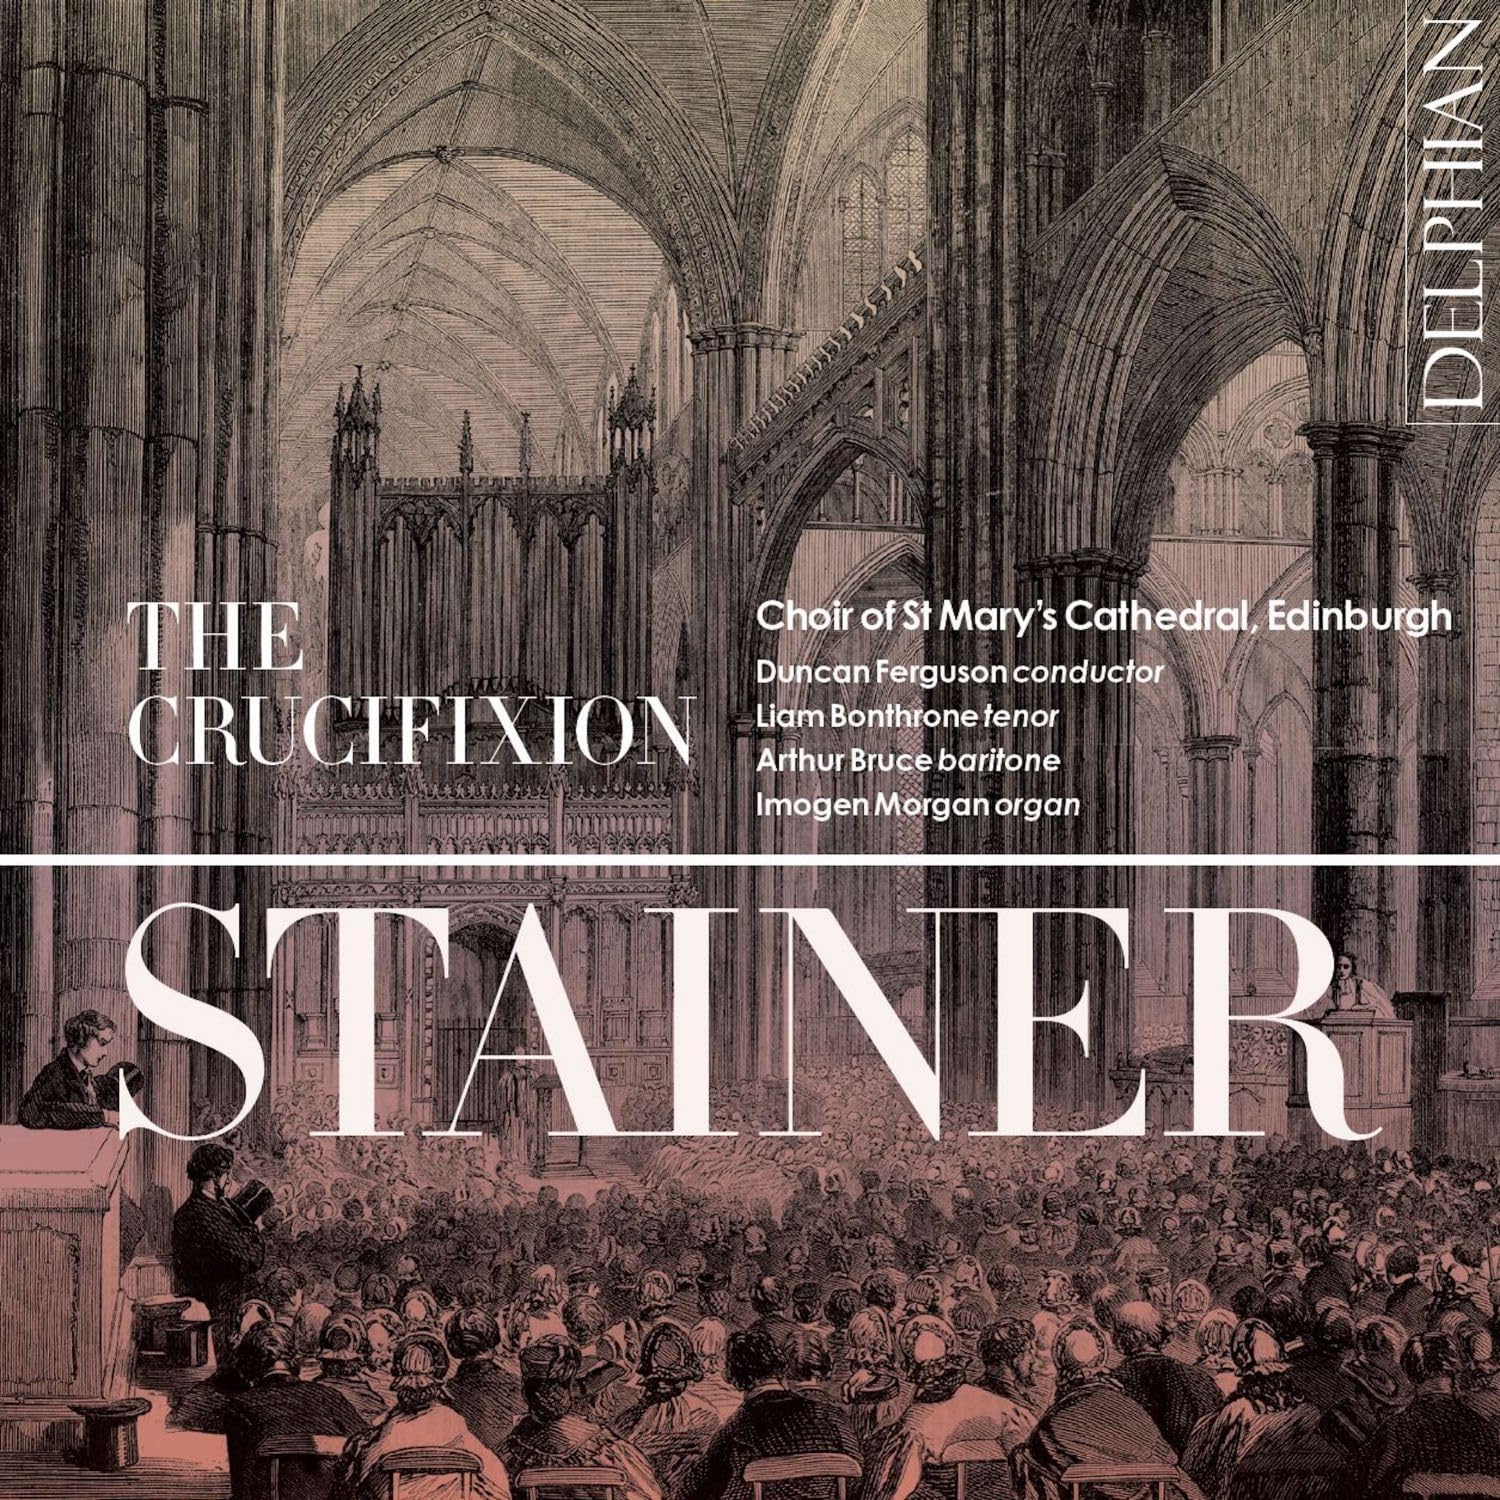 Stainer crucifixion